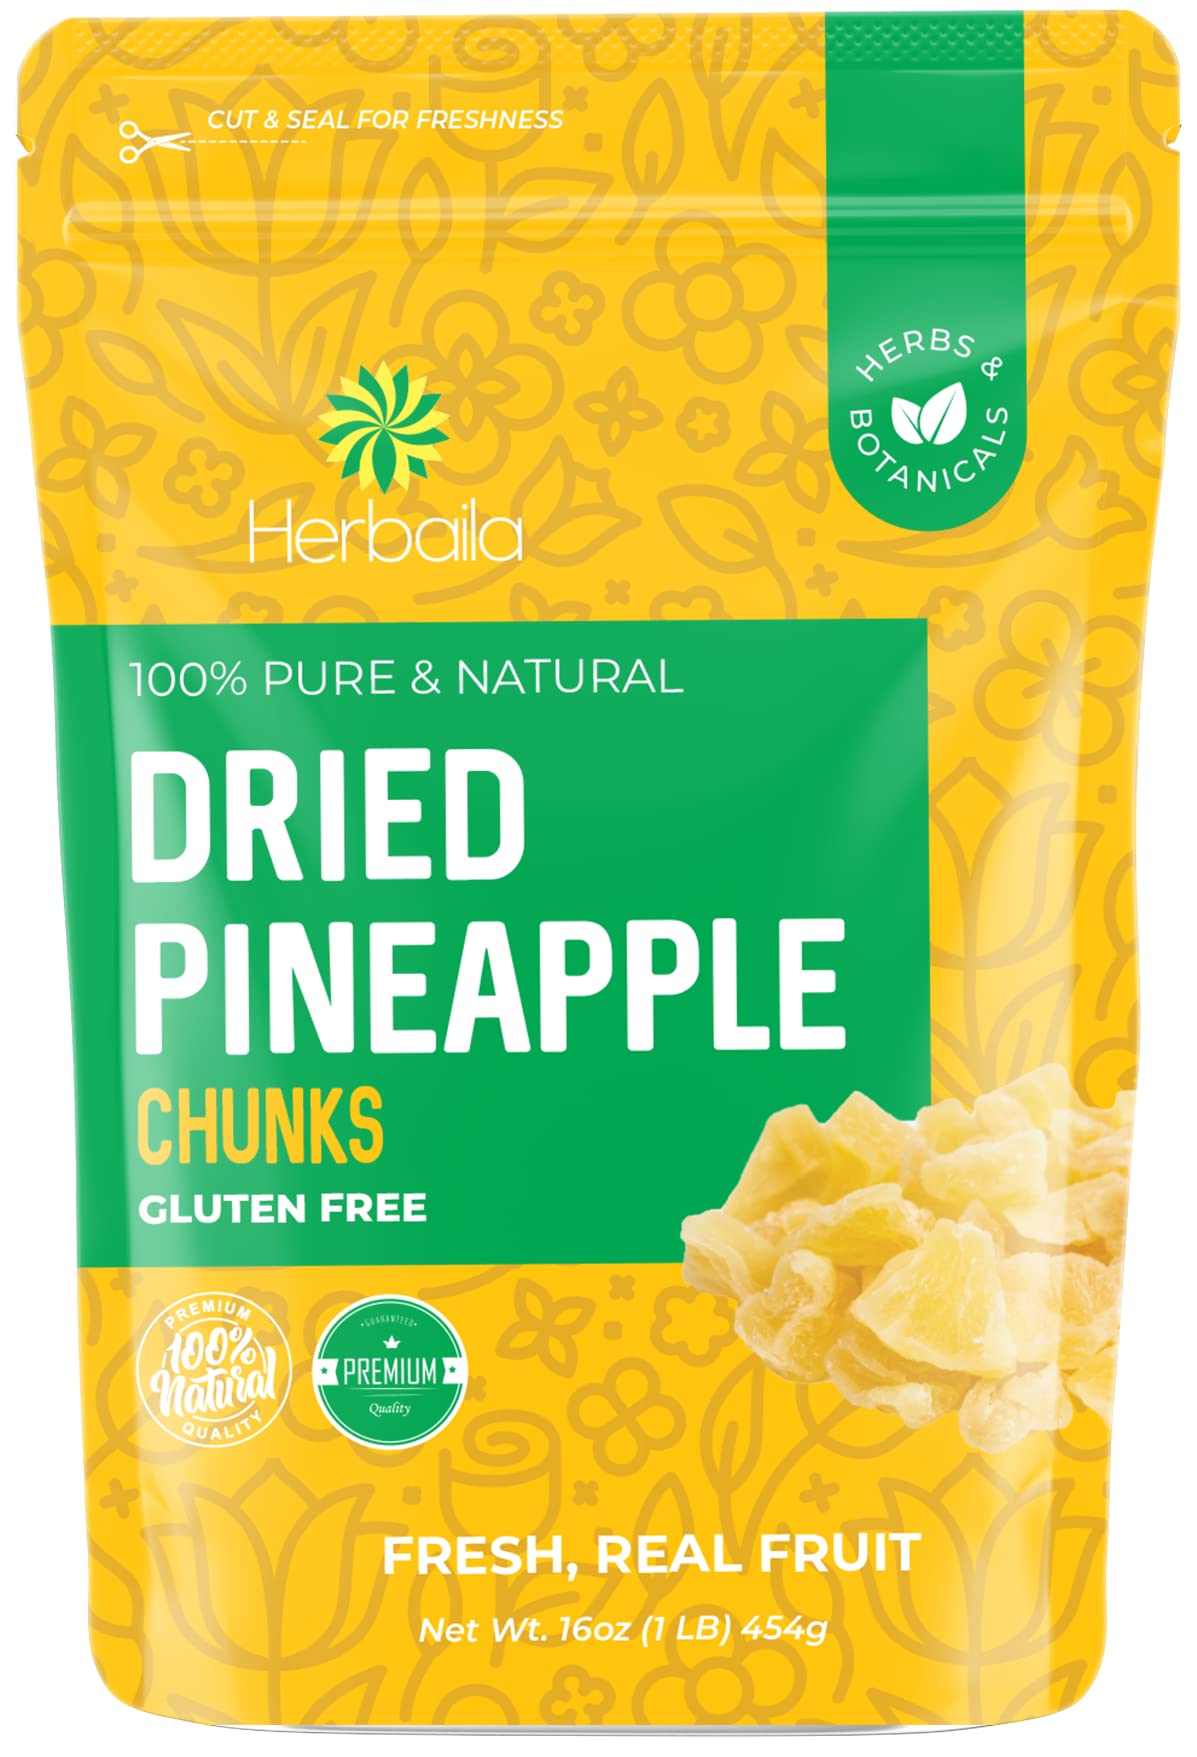 1 Pound. Dehydrated Pineapple Chunk, Dehydrated Pineapple Bulk Bits. All Natural, Non-GMO, Lightly Sweetened Dried Pineapples, 16 oz.